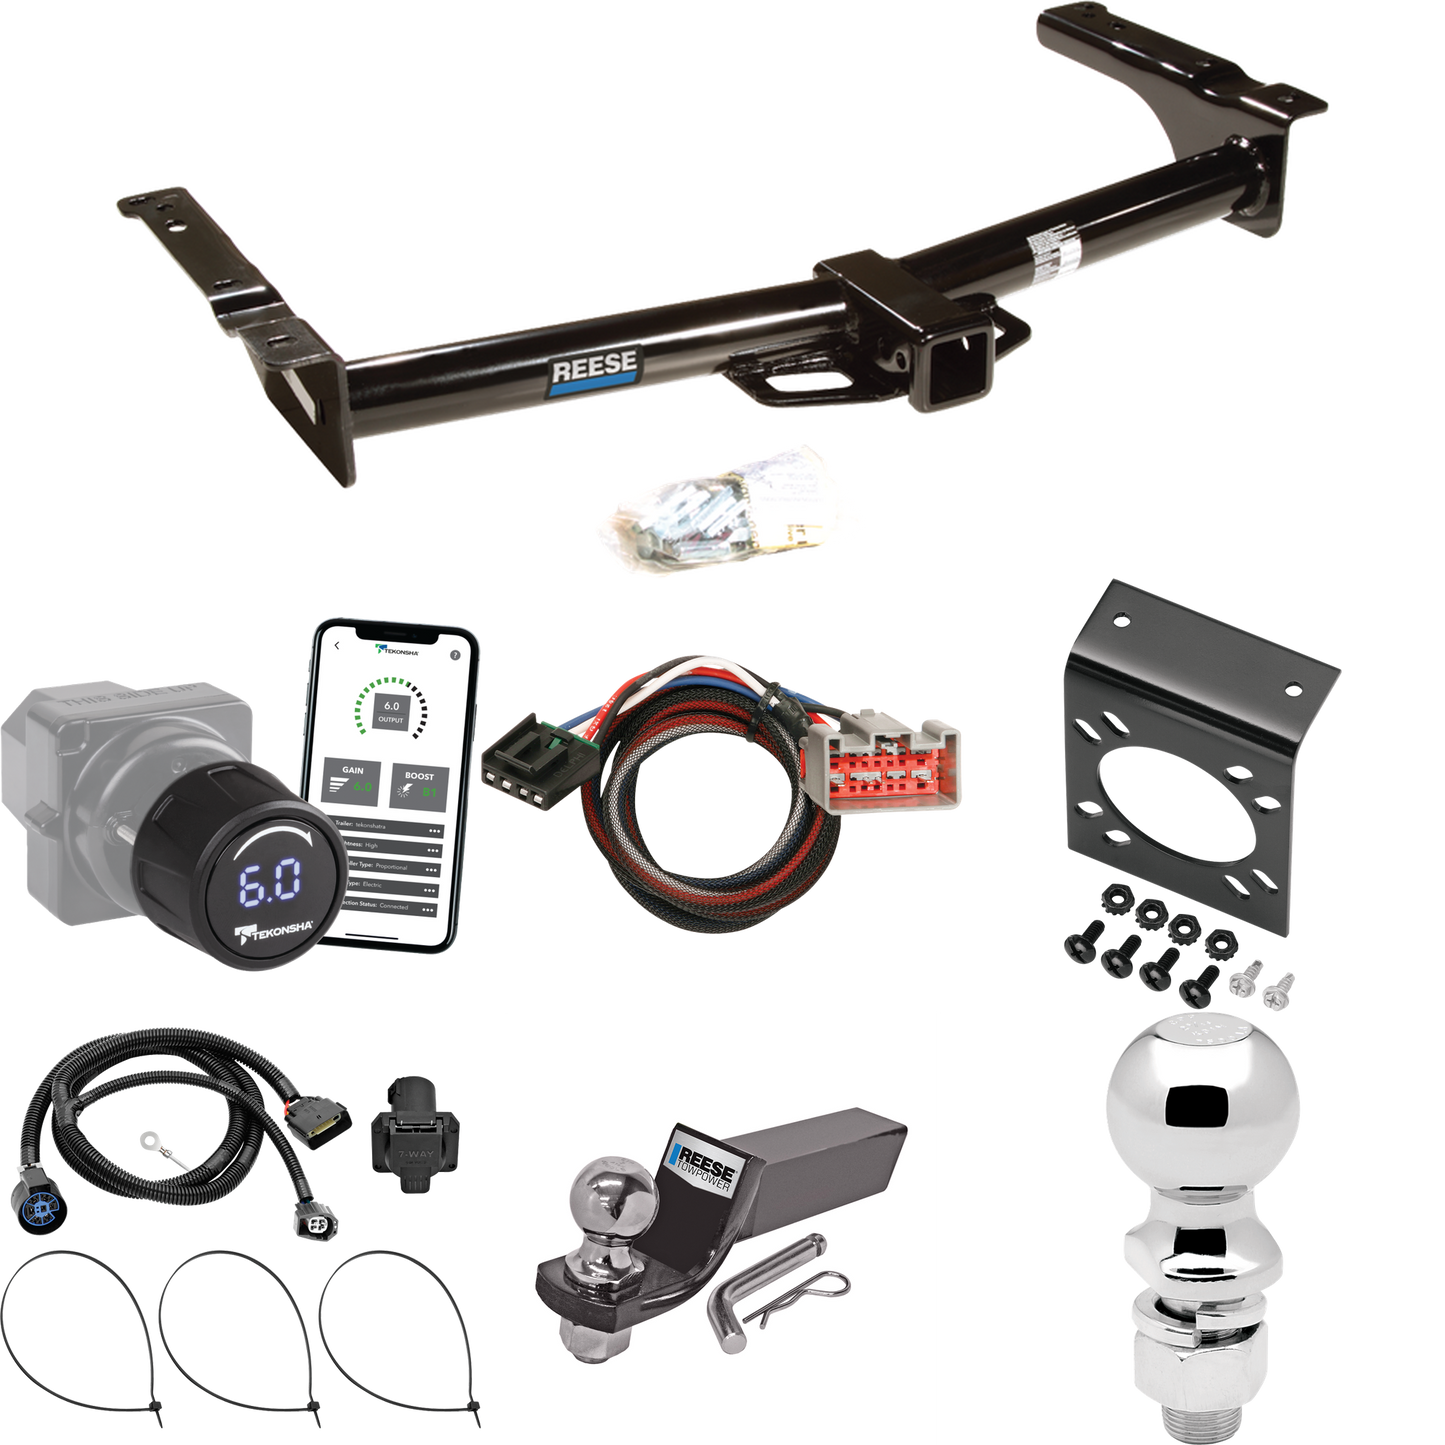 Fits 2009-2012 Ford E-350 Econoline Super Duty Trailer Hitch Tow PKG w/ Tekonsha Prodigy iD Bluetooth Wireless Brake Control + Plug & Play BC Adapter + 7-Way RV Wiring + 2" & 2-5/16" Ball & Drop Mount (For (Prepped Class II Tow Package) Models) By Re